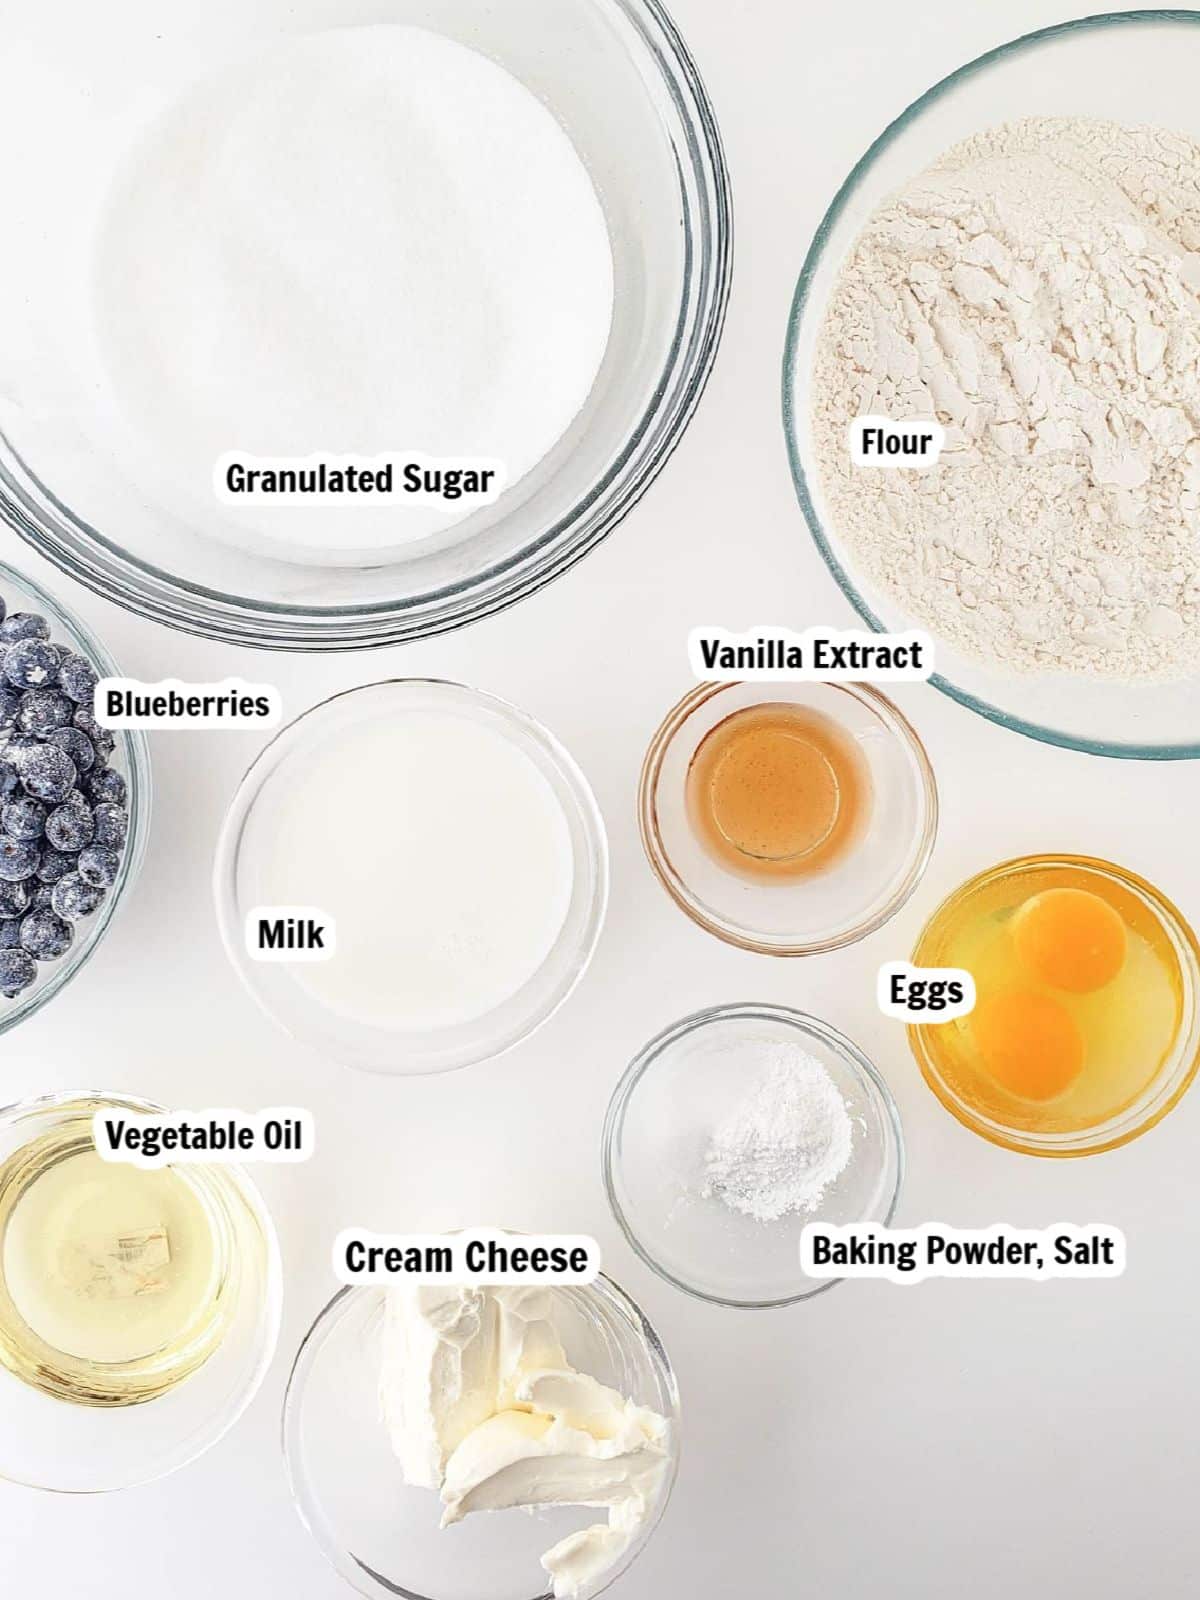 Ingredients for blueberry muffins.